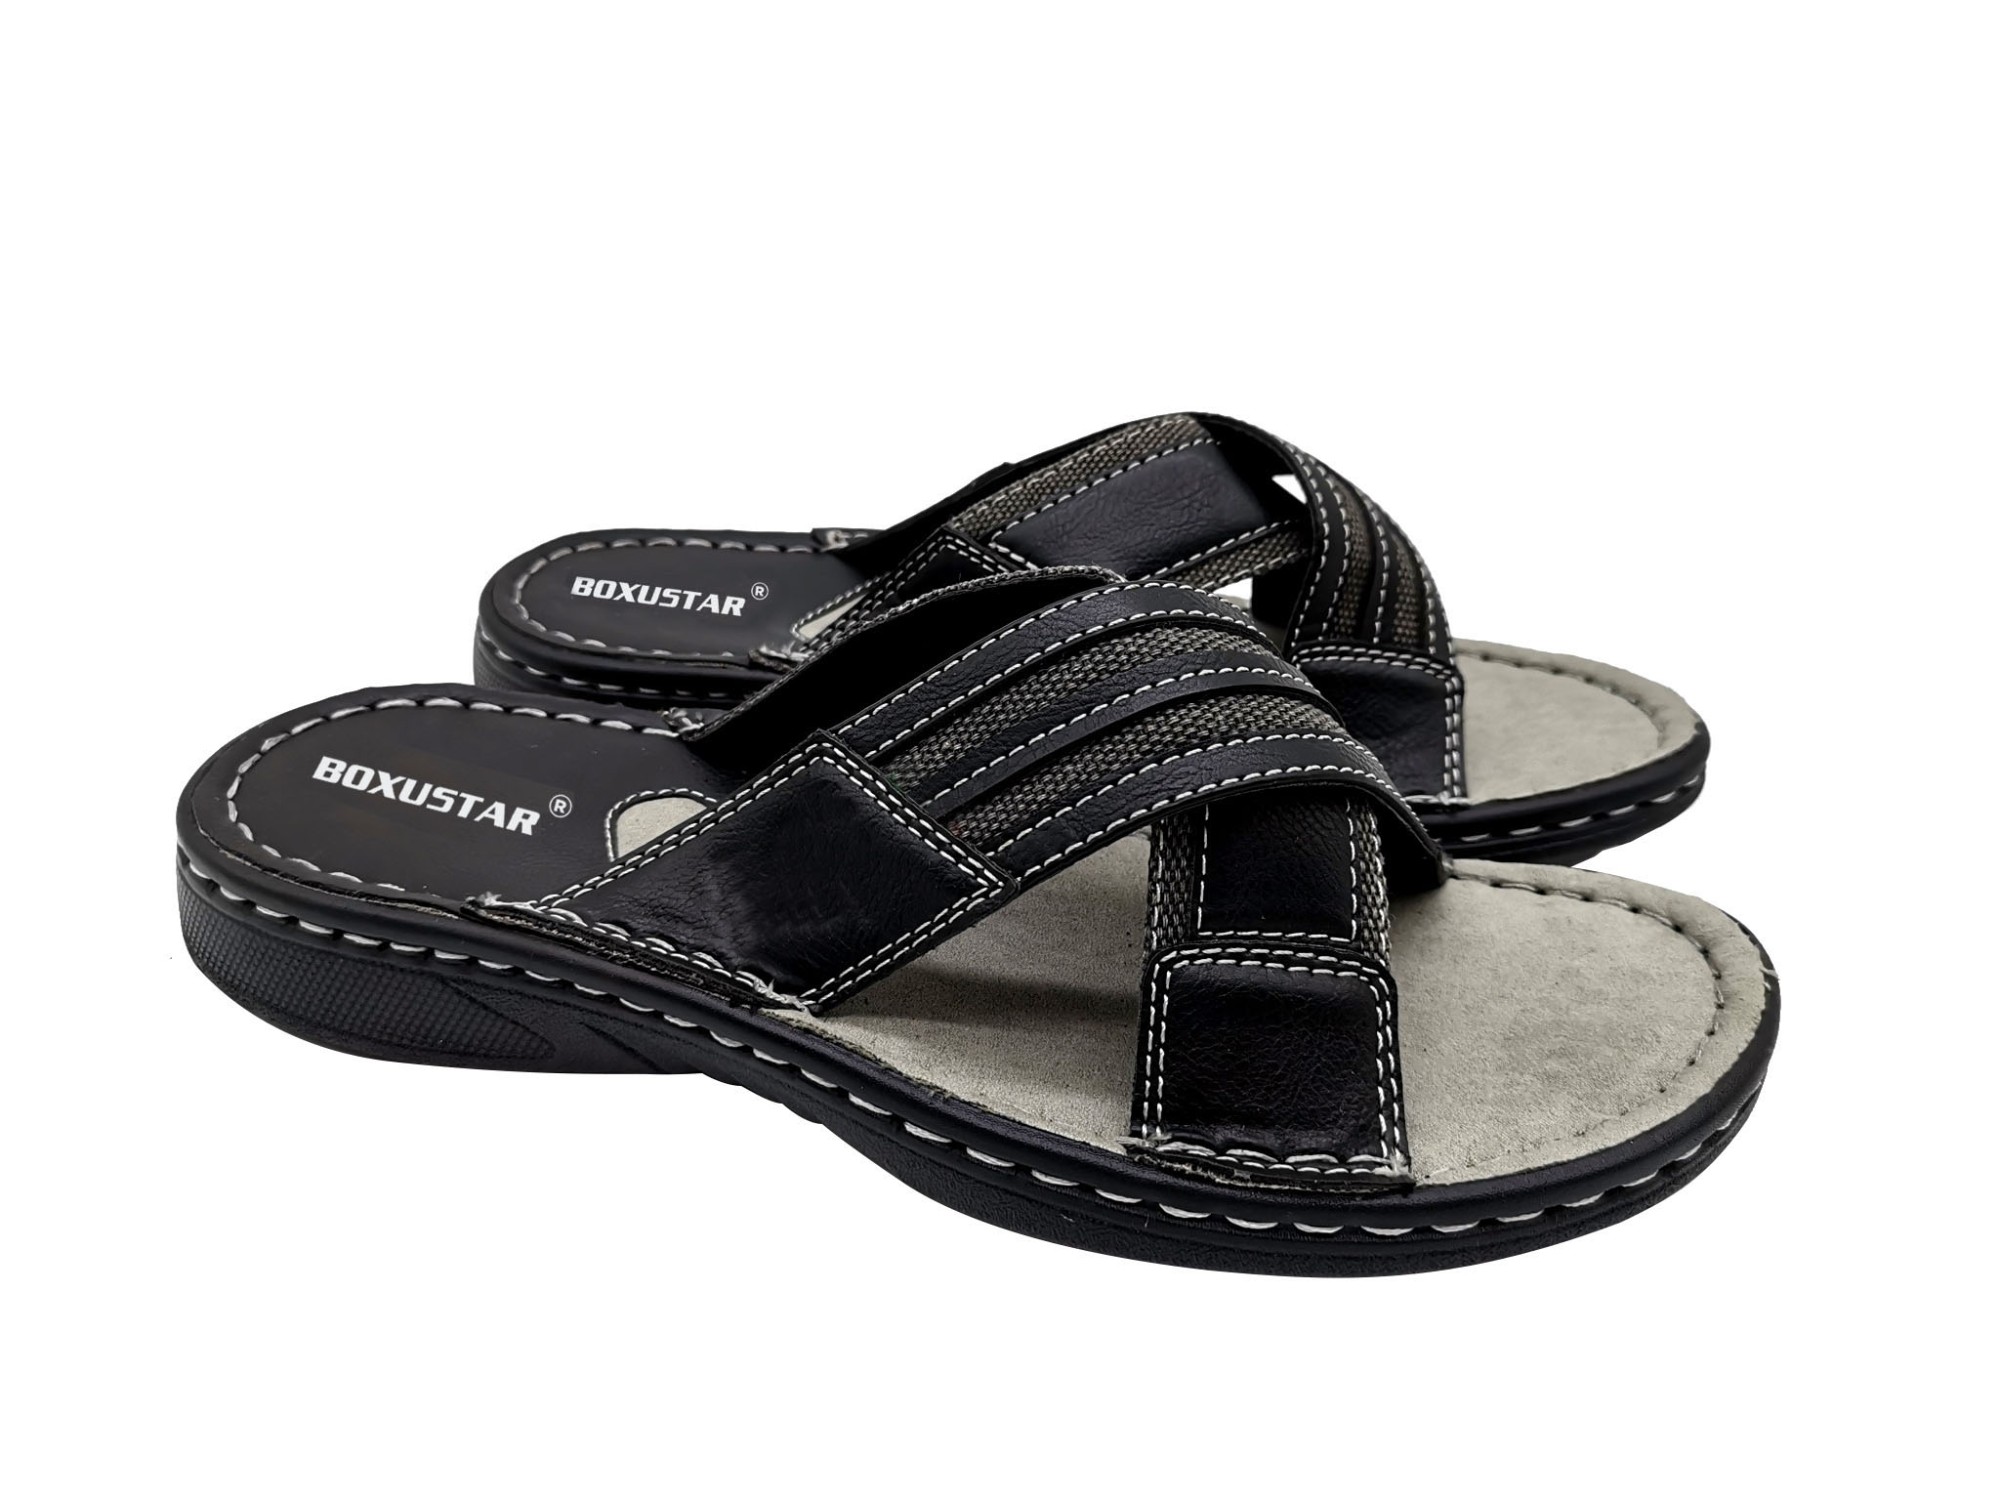 Casual Sandal with pu/canvas upper and PU outsole Manufacturers, Casual Sandal with pu/canvas upper and PU outsole Factory, Supply Casual Sandal with pu/canvas upper and PU outsole